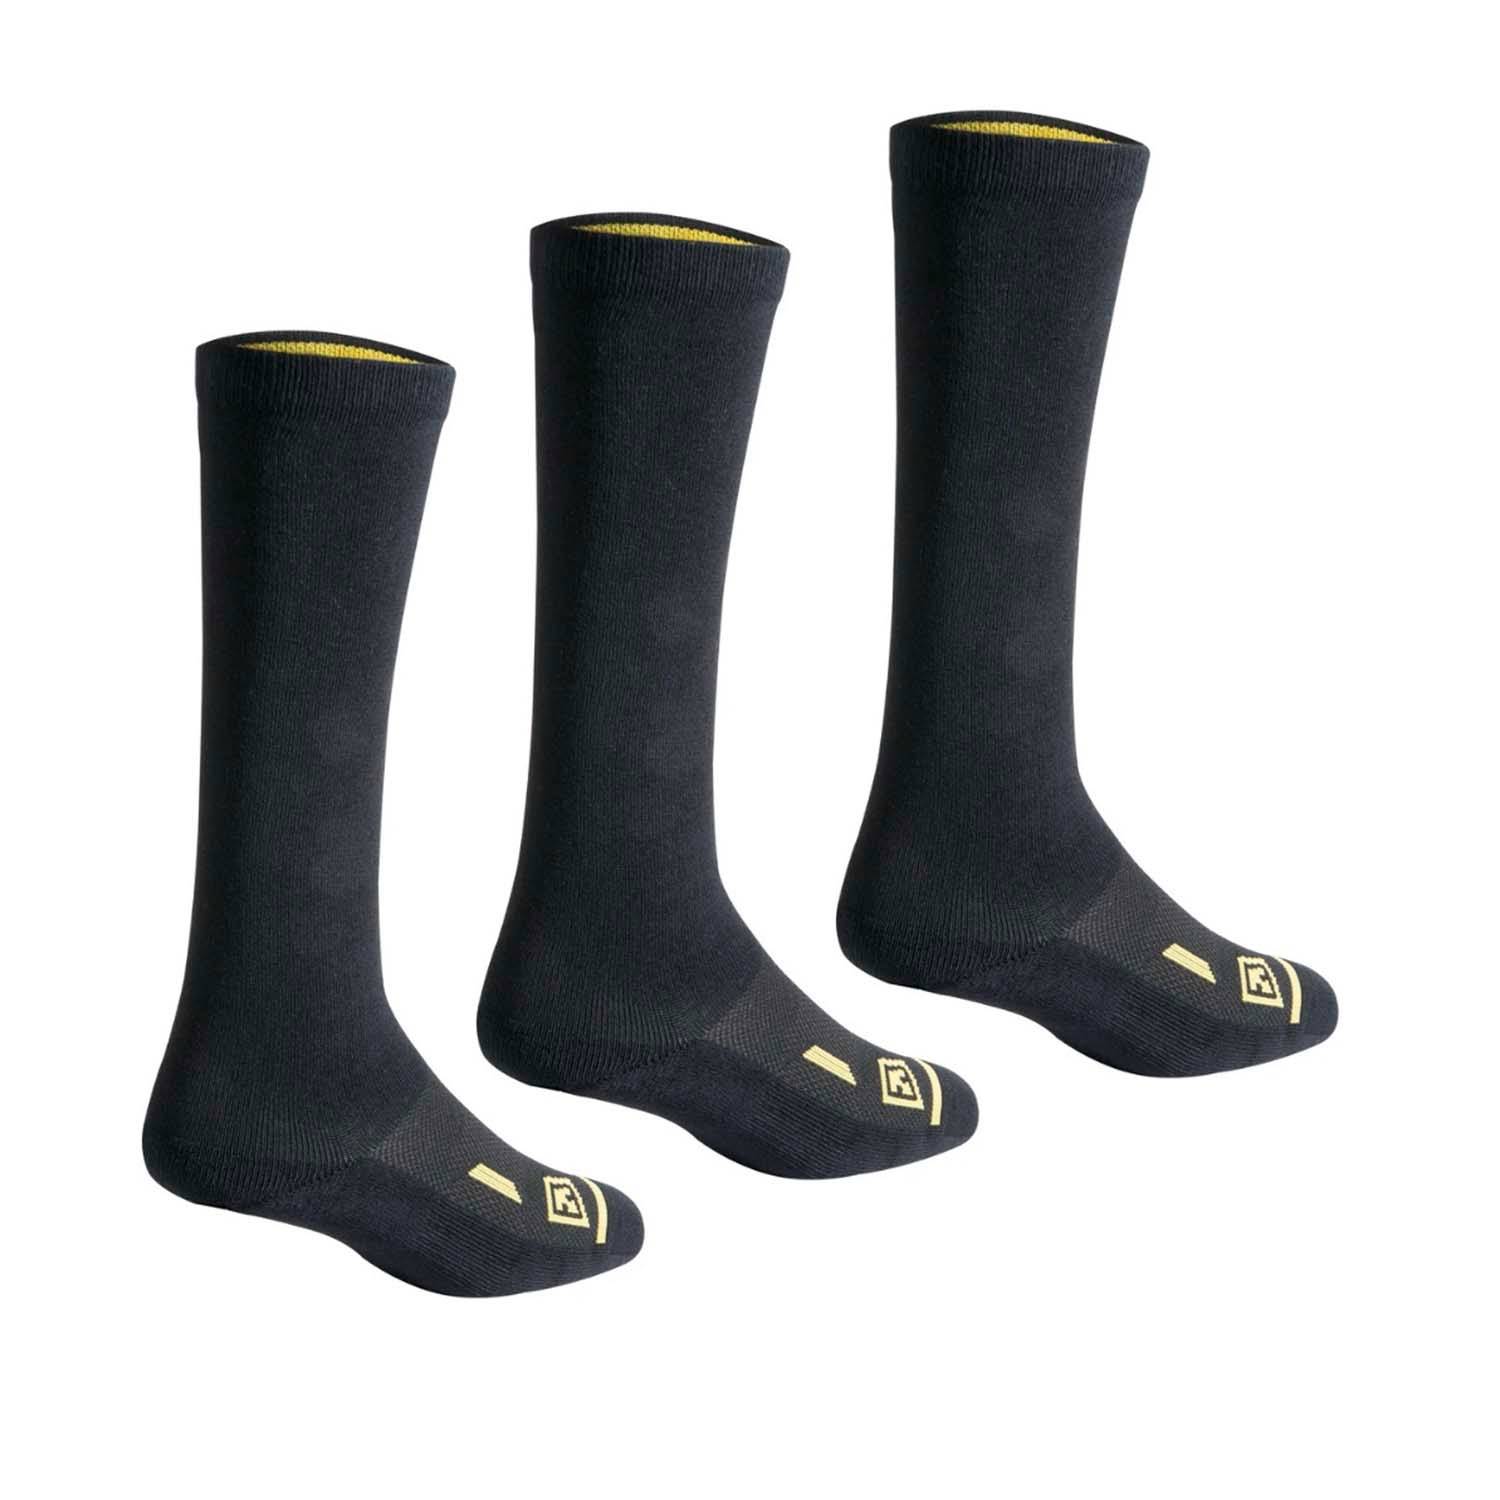 First Tactical 9" Cotton Duty Socks (3-Pack)